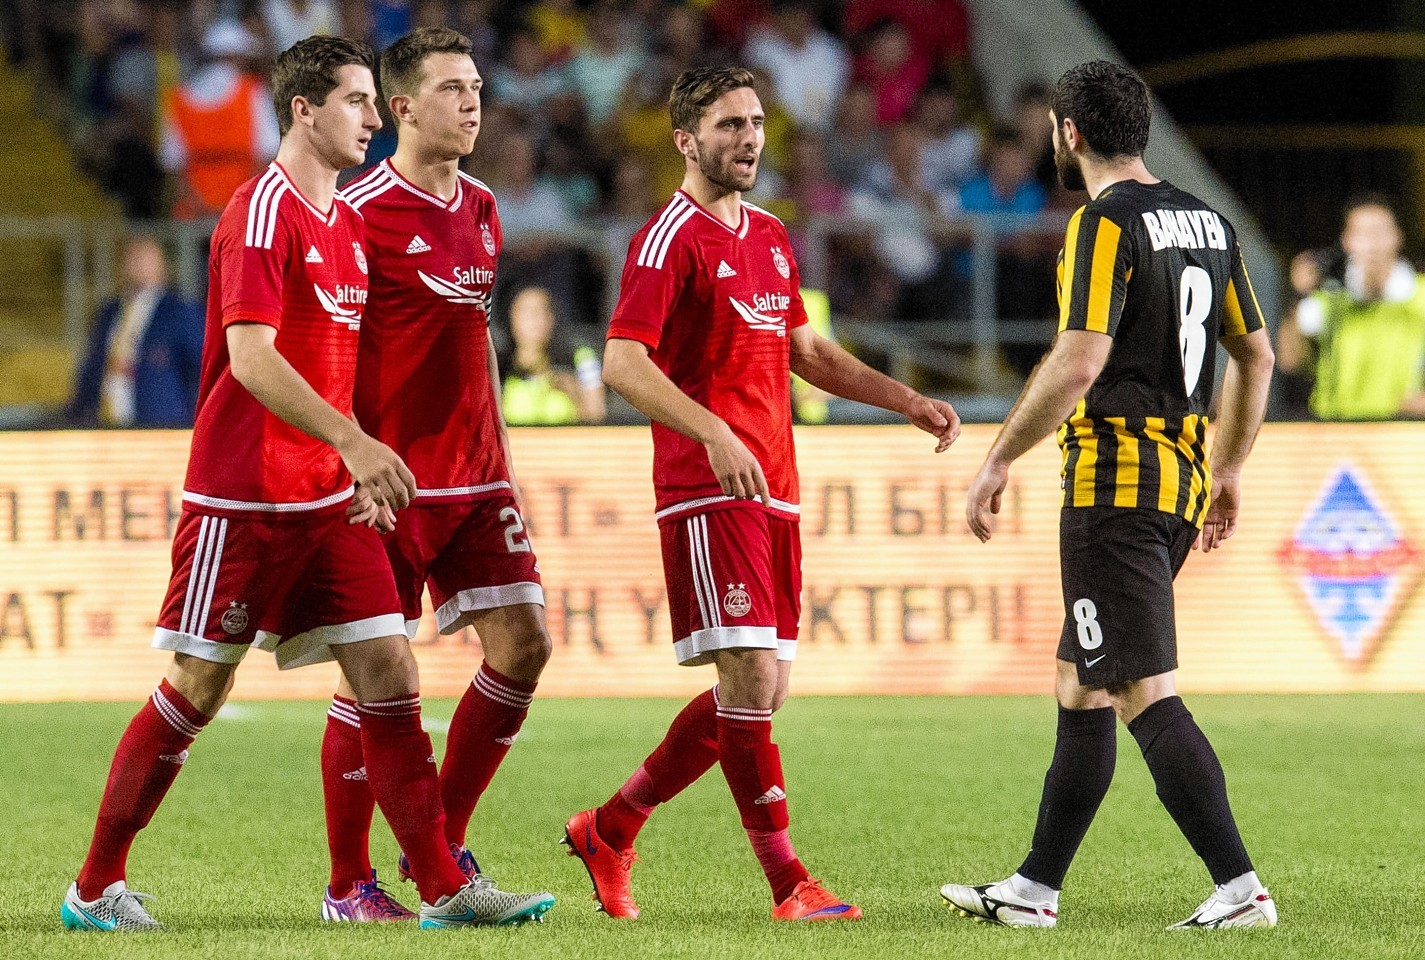 Kairat Almaty's Mikhail Bakayev exchanges words with Shinnie and his Dons team mates Ryan Jack and Kenny McLean